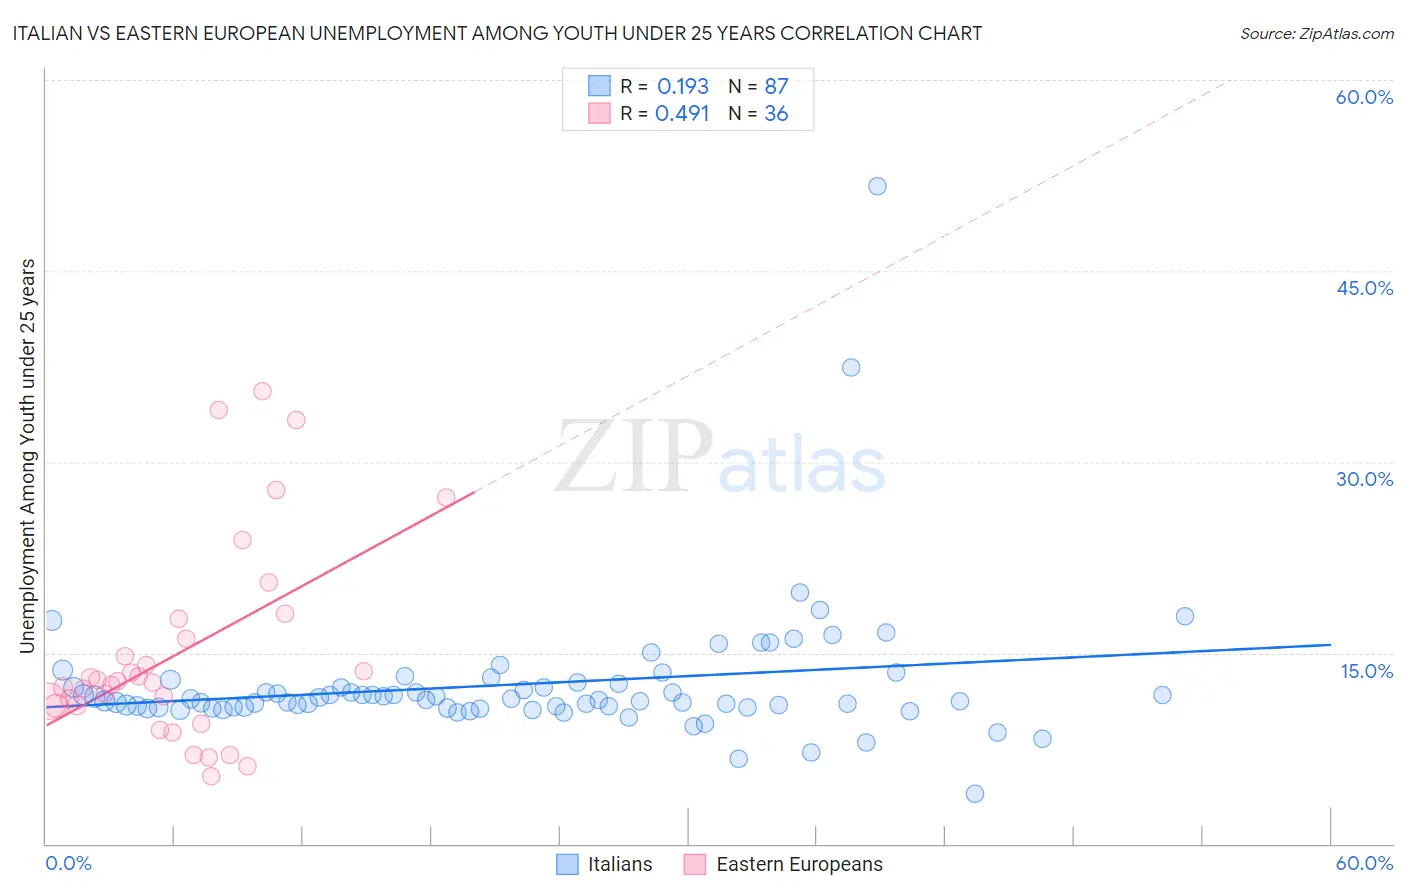 Italian vs Eastern European Unemployment Among Youth under 25 years